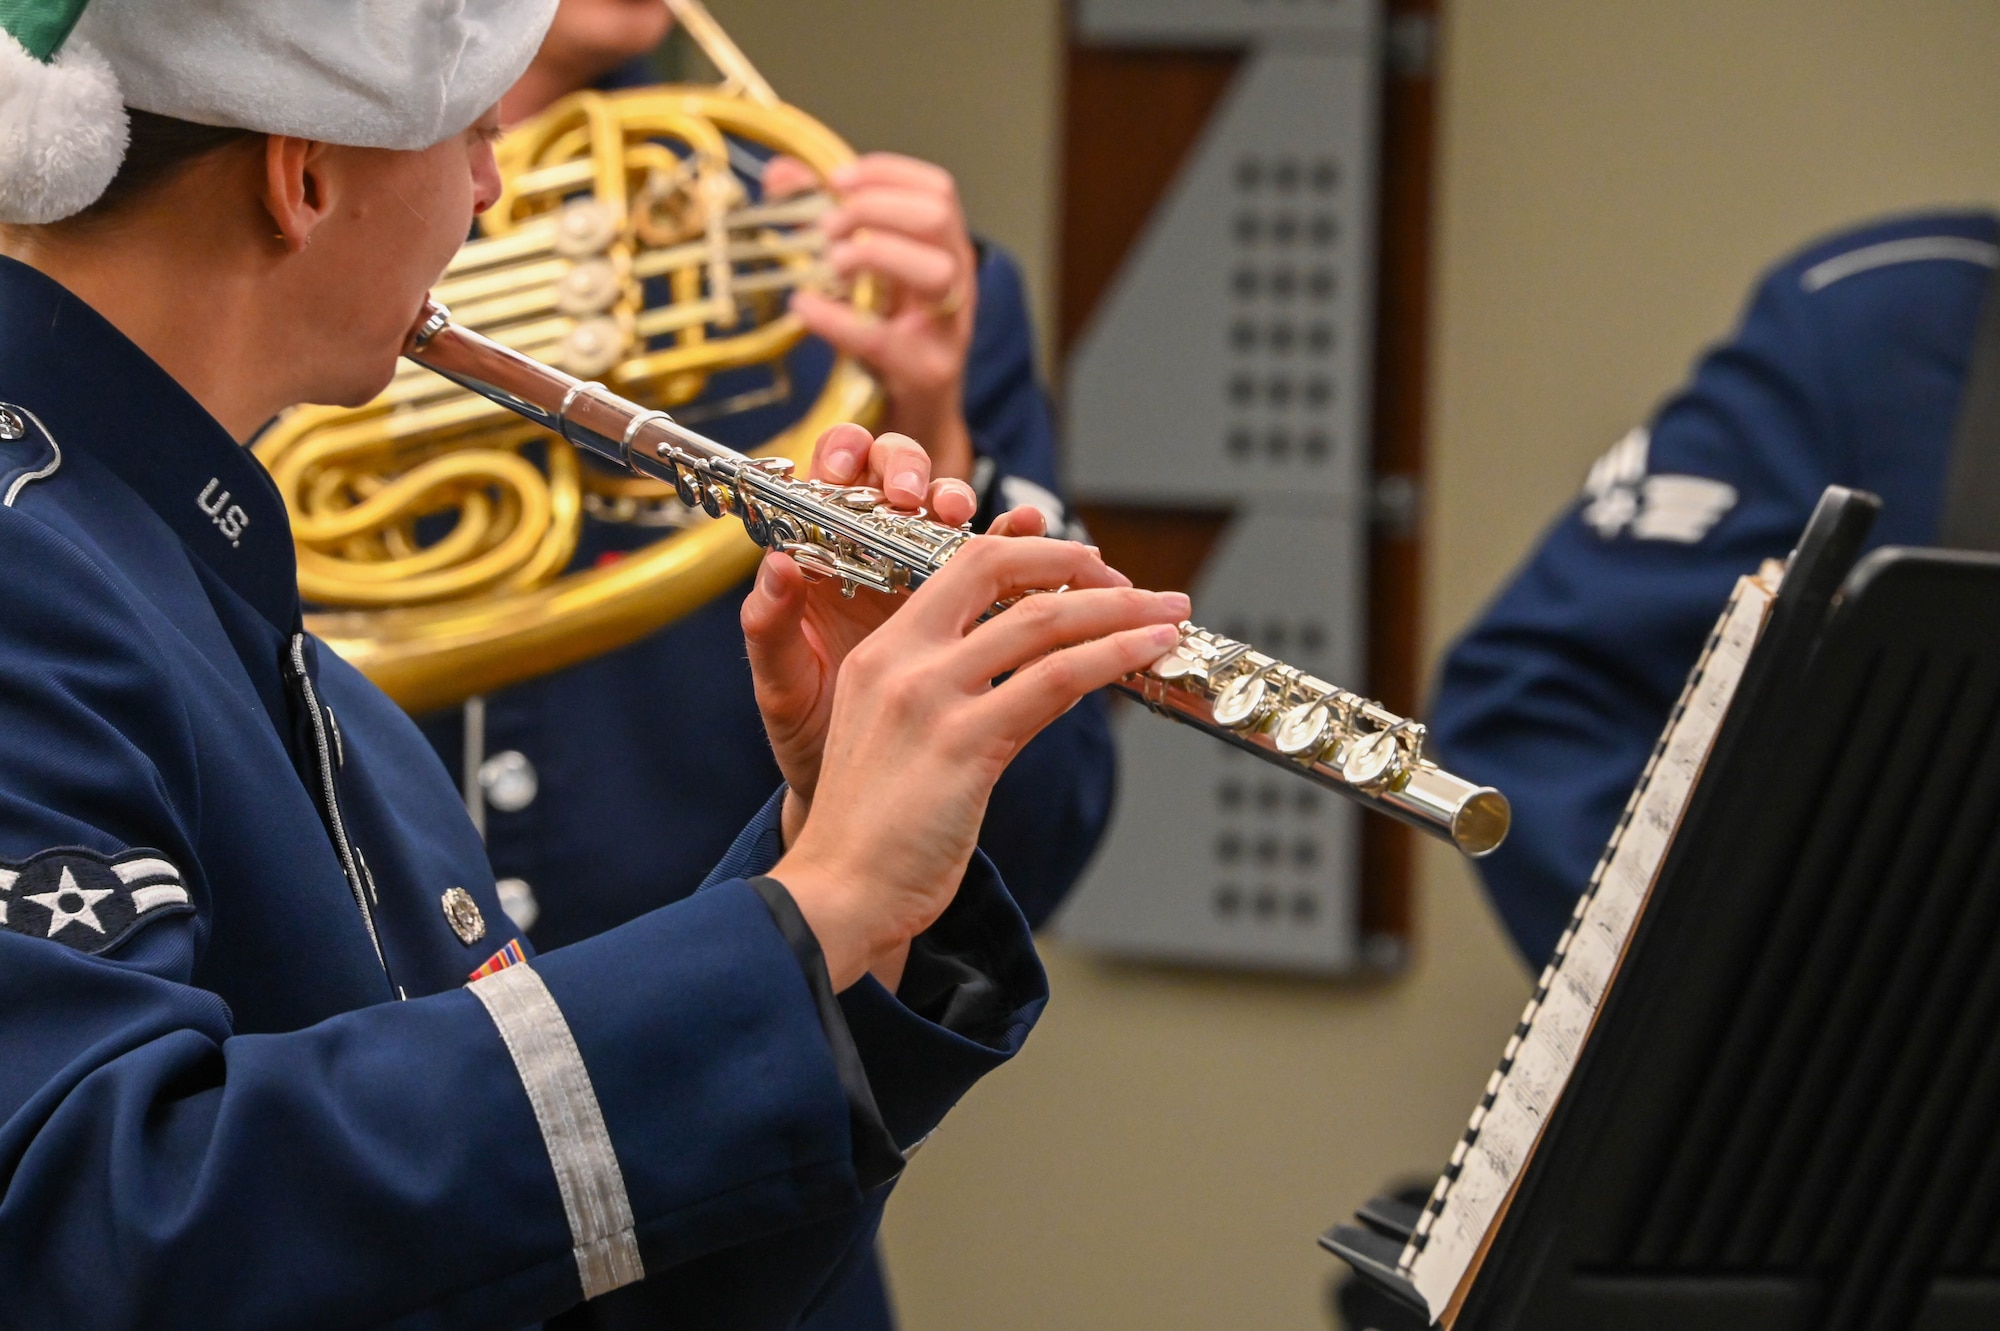 Airman 1st Class Emily Lloyd, U.S. Air Force Band of the West flutist, plays the flute with the U.S. Air Force Band of the West at the 97th Medical Group at Altus Air Force Base, Oklahoma, Dec. 14, 2021. The Airmen assigned to the band are highly-trained professional musicians who have dedicated themselves to serving their country through music. (U.S. Air Force photo by Airman 1st Class Kayla Christenson)